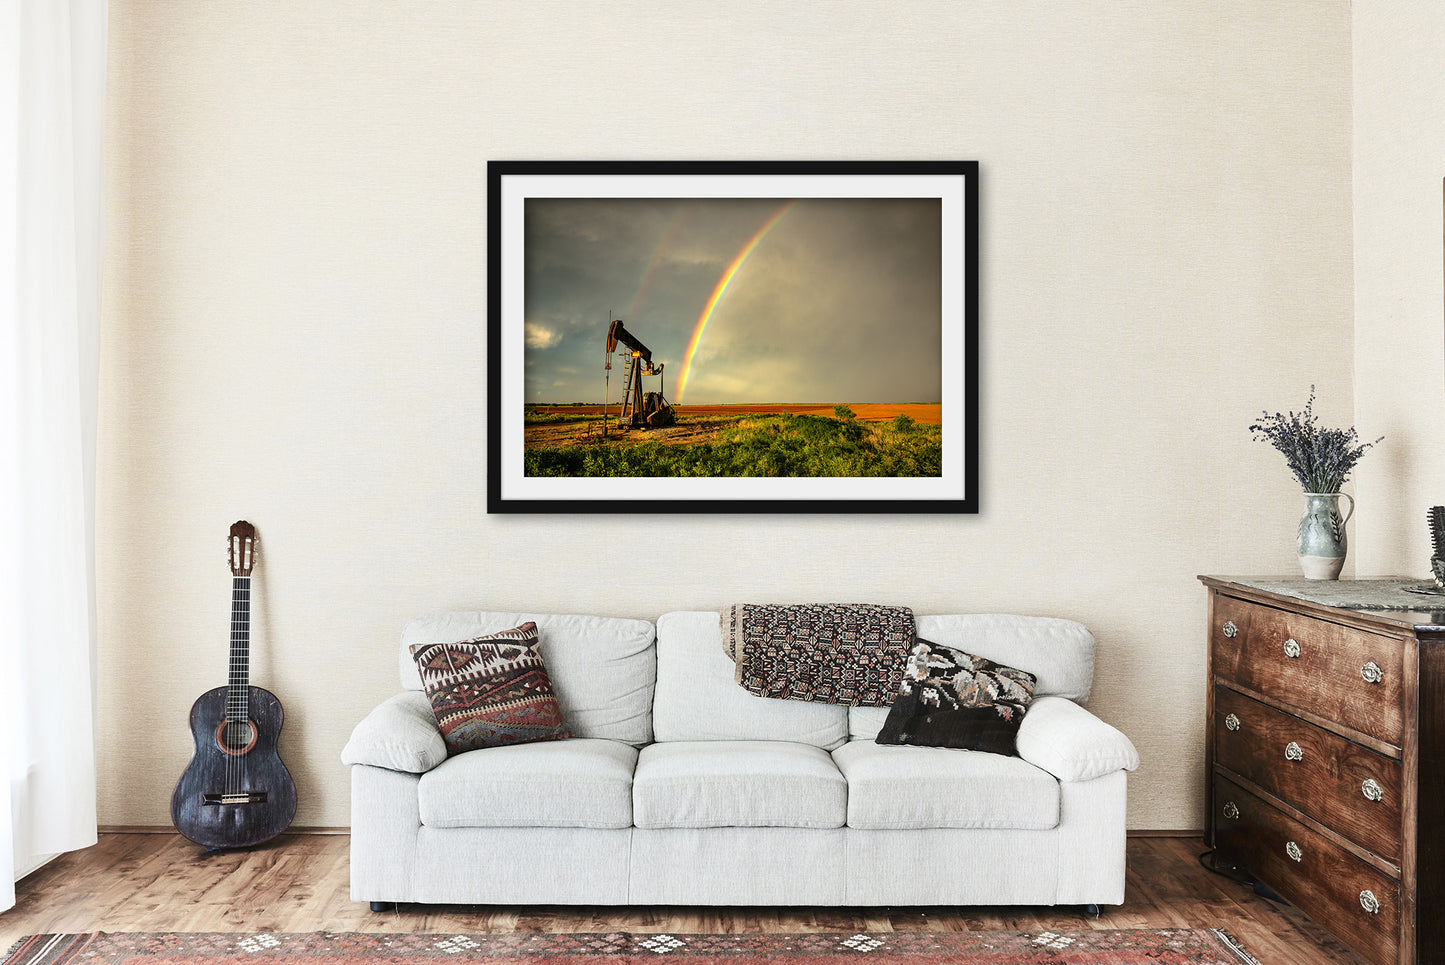 Pump Jack Framed and Matted Print | Rainbow Photo | Texas Decor | Oilfield Photography | Oil and Gas Wall Art | Ready to Hang